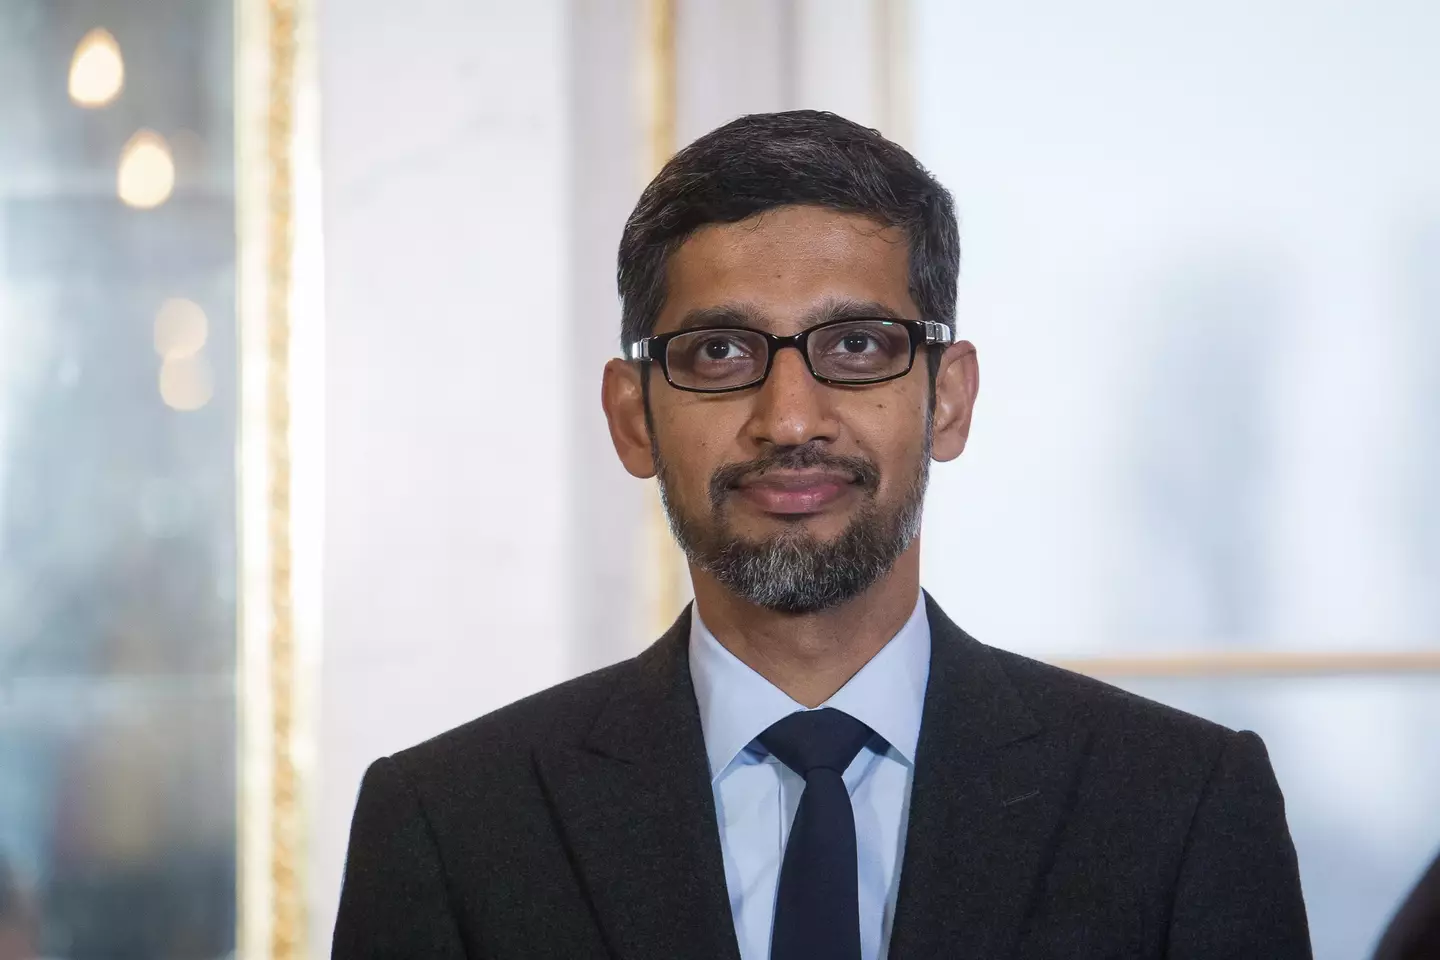 Pichai also said Google would be slowing the pace of hiring.